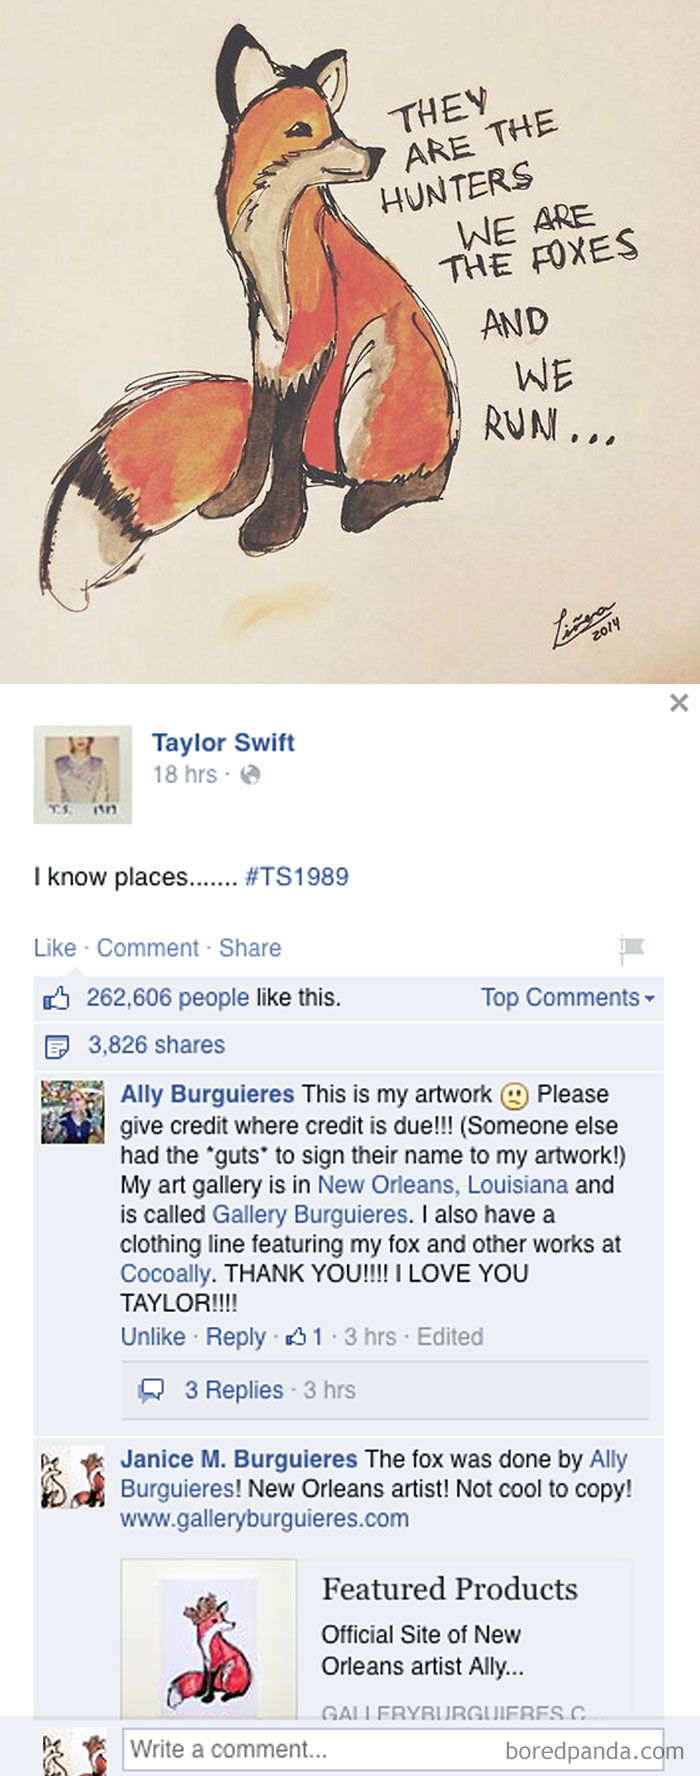 Taylor Swift Posted A Fan Art Which Later Turned Out To Be Art Thievery From Artist Ally Burguieres